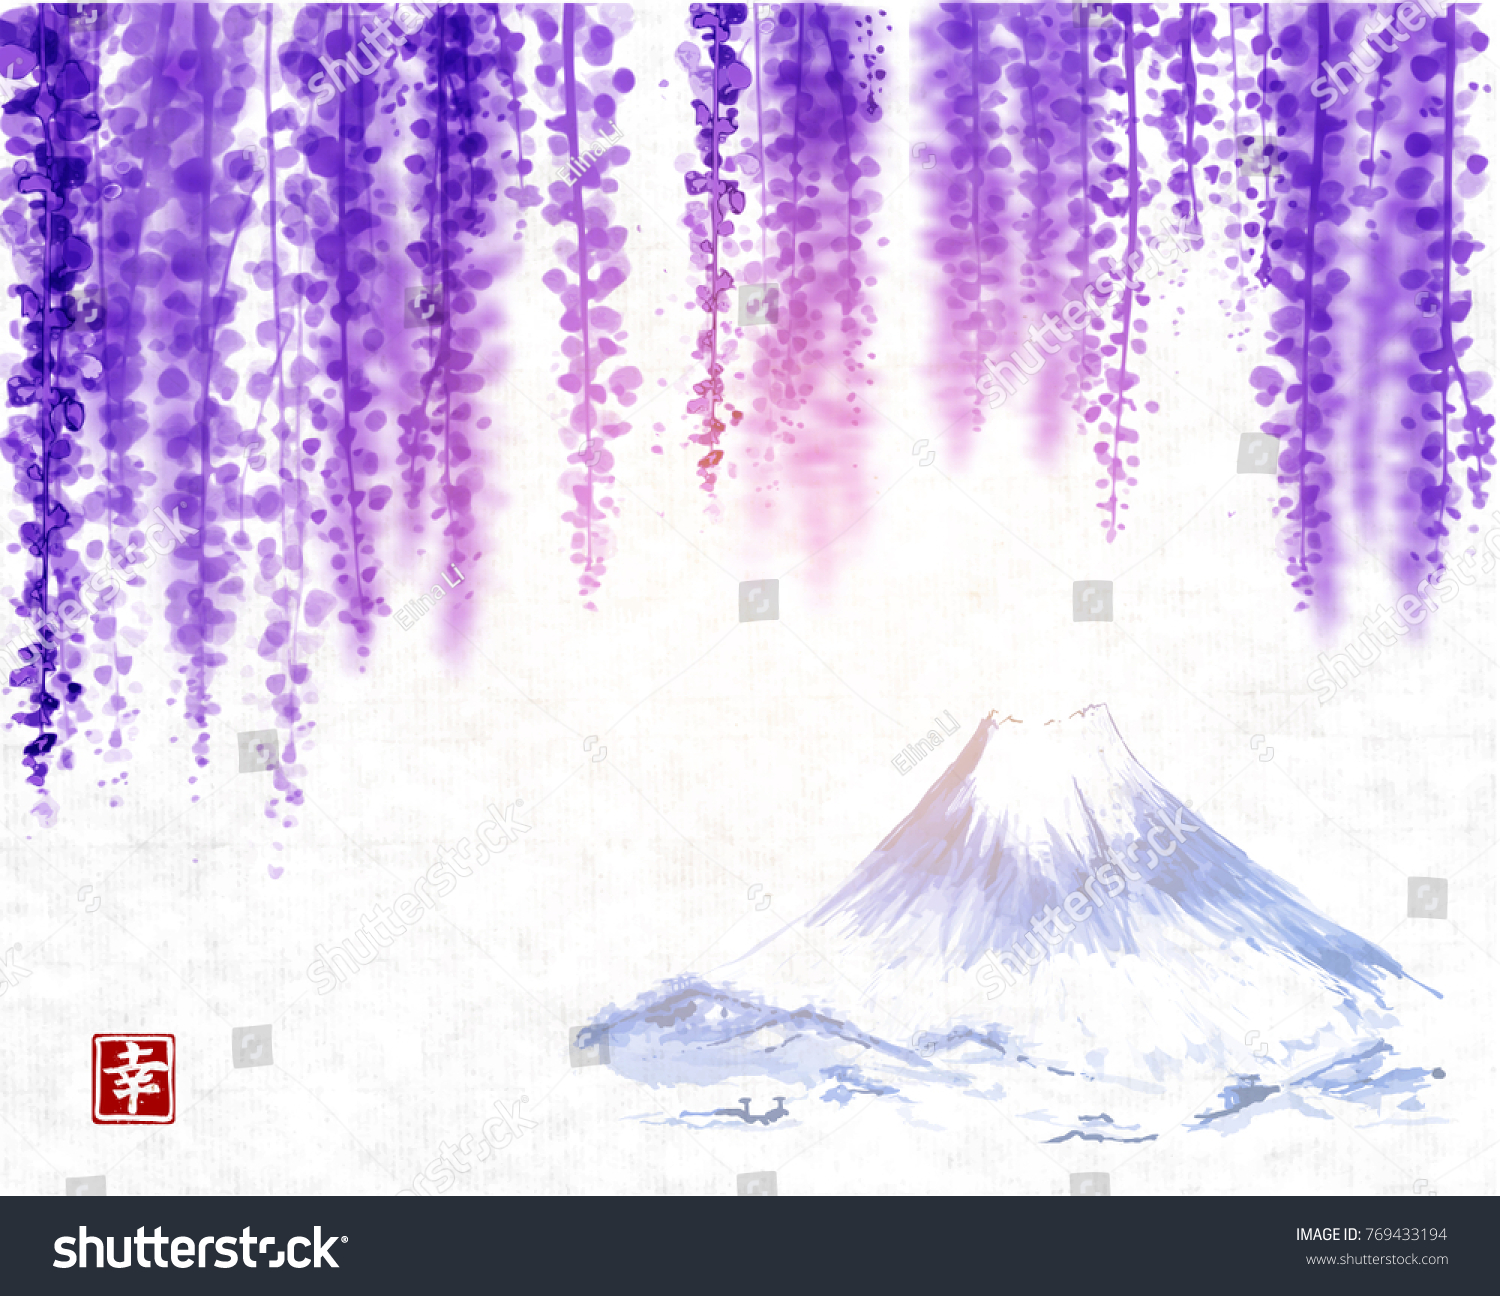 SVG of Wisteria blossom and Fujiyama mountain on rice paper background. Traditional oriental ink painting sumi-e, u-sin, go-hua. Contains hieroglyph - happiness svg